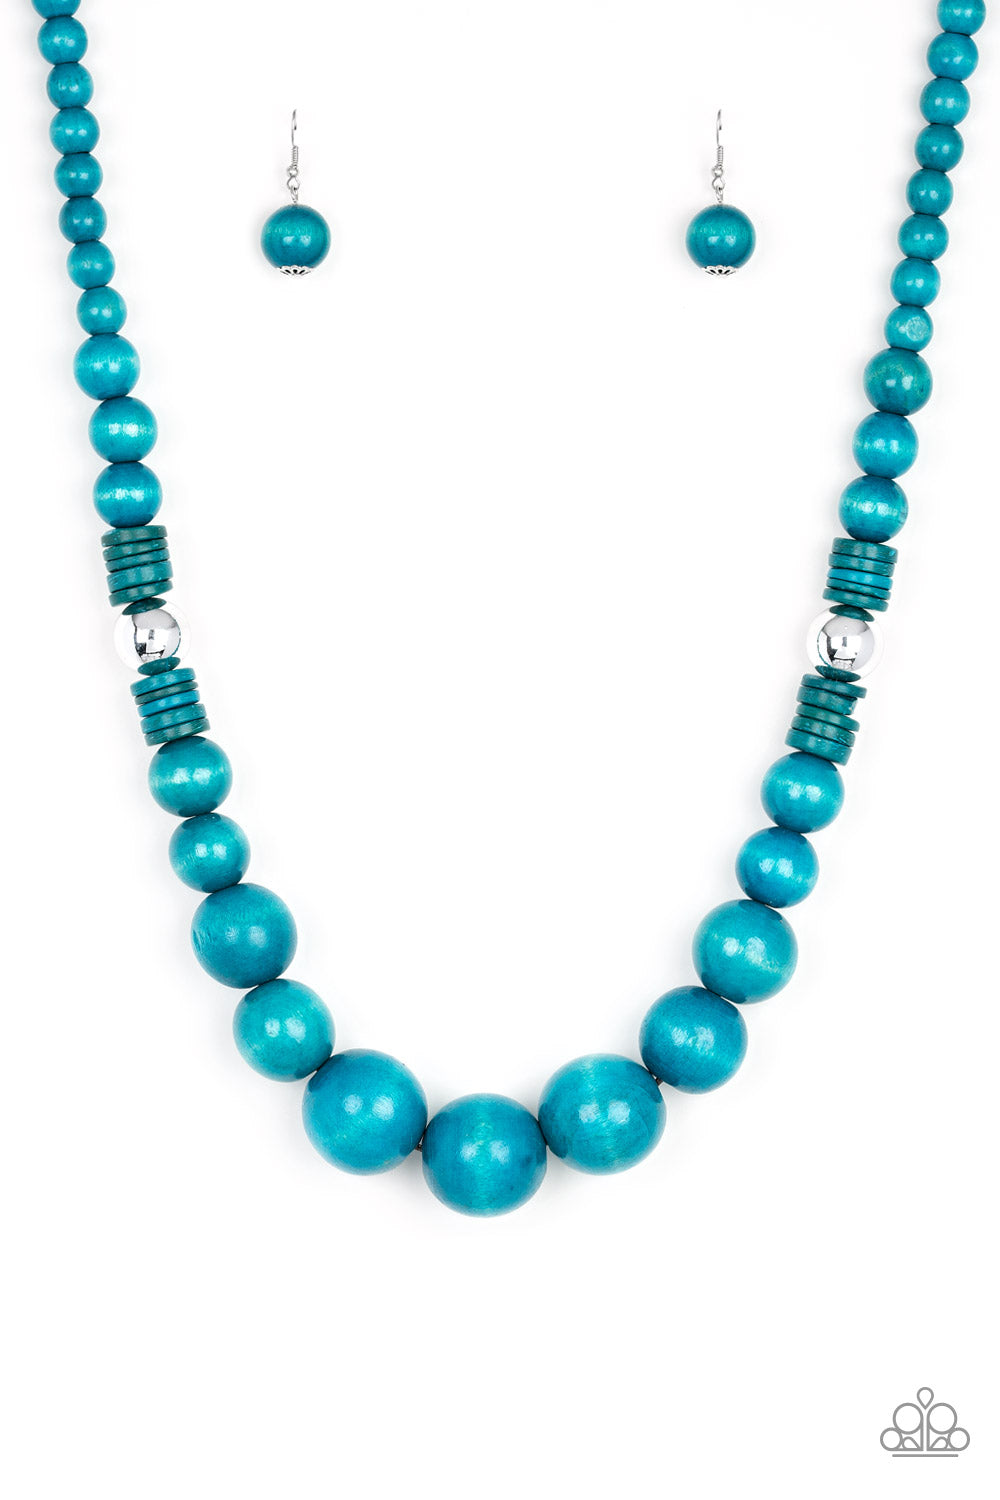 PANAMA PANORAMA - BLUE WOODEN BEADS AND SILVER NECKLACE